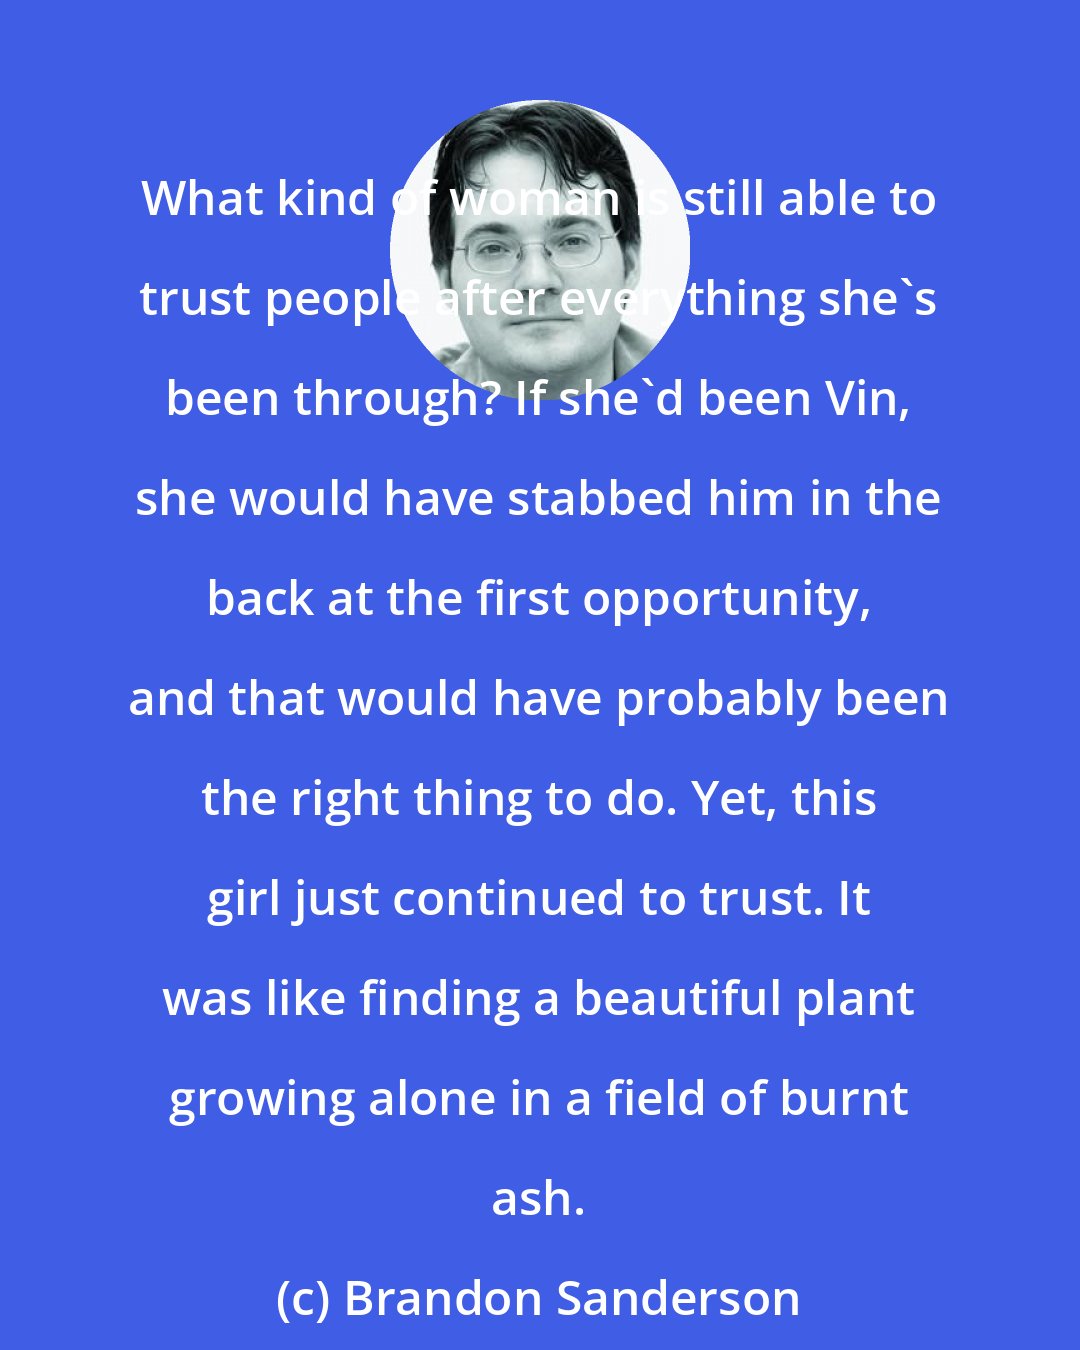 Brandon Sanderson: What kind of woman is still able to trust people after everything she's been through? If she'd been Vin, she would have stabbed him in the back at the first opportunity, and that would have probably been the right thing to do. Yet, this girl just continued to trust. It was like finding a beautiful plant growing alone in a field of burnt ash.